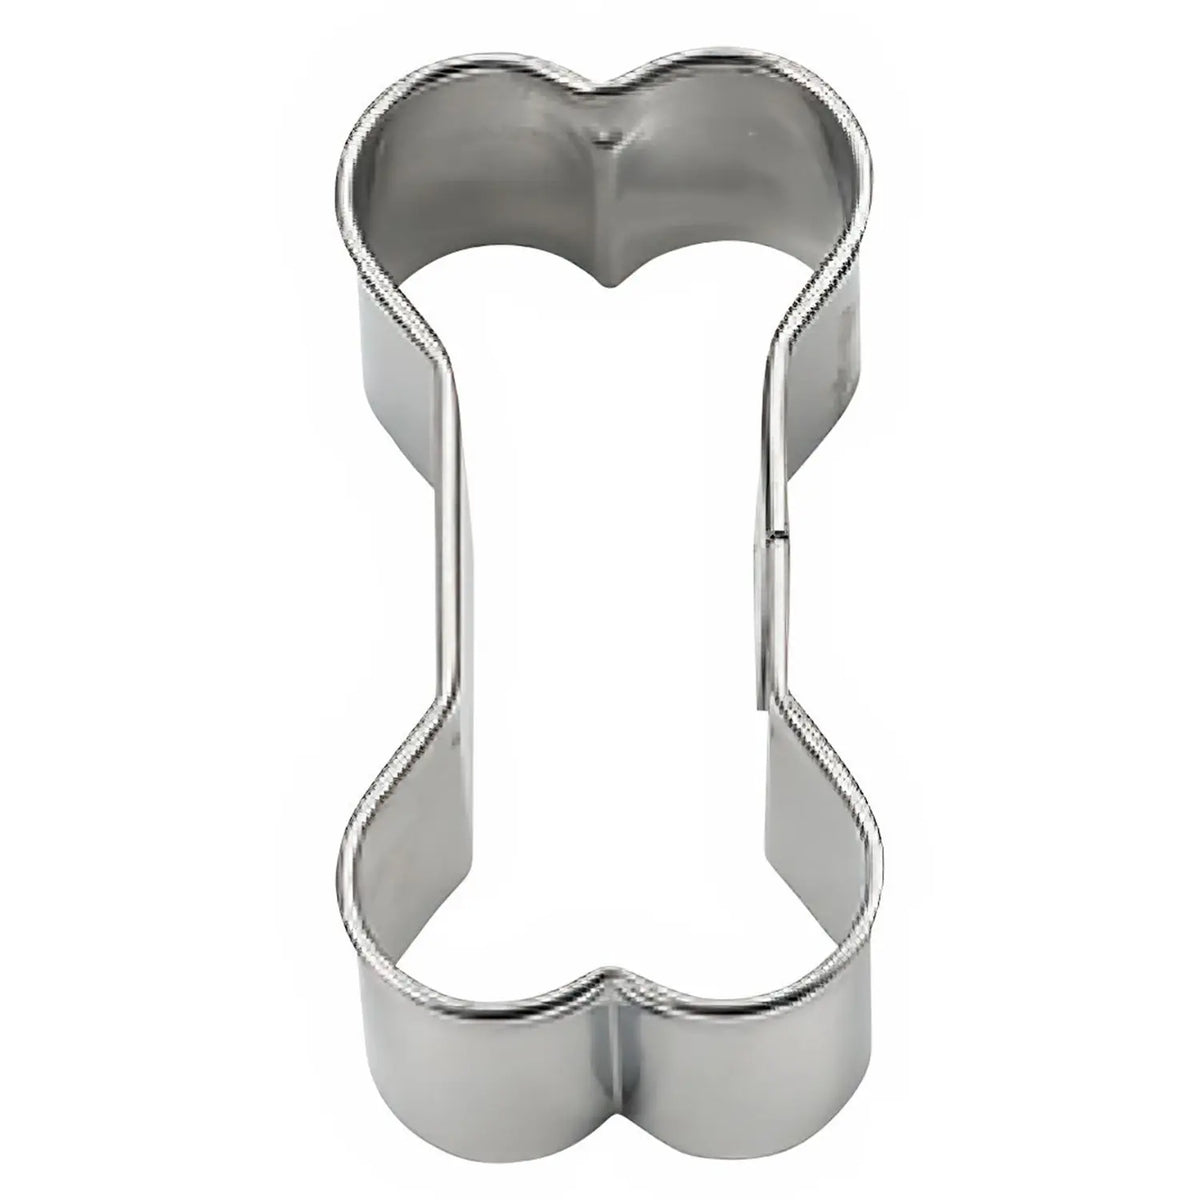 TIGERCROWN Cake Land Stainless Steel Cookie Cutter Dog Bone